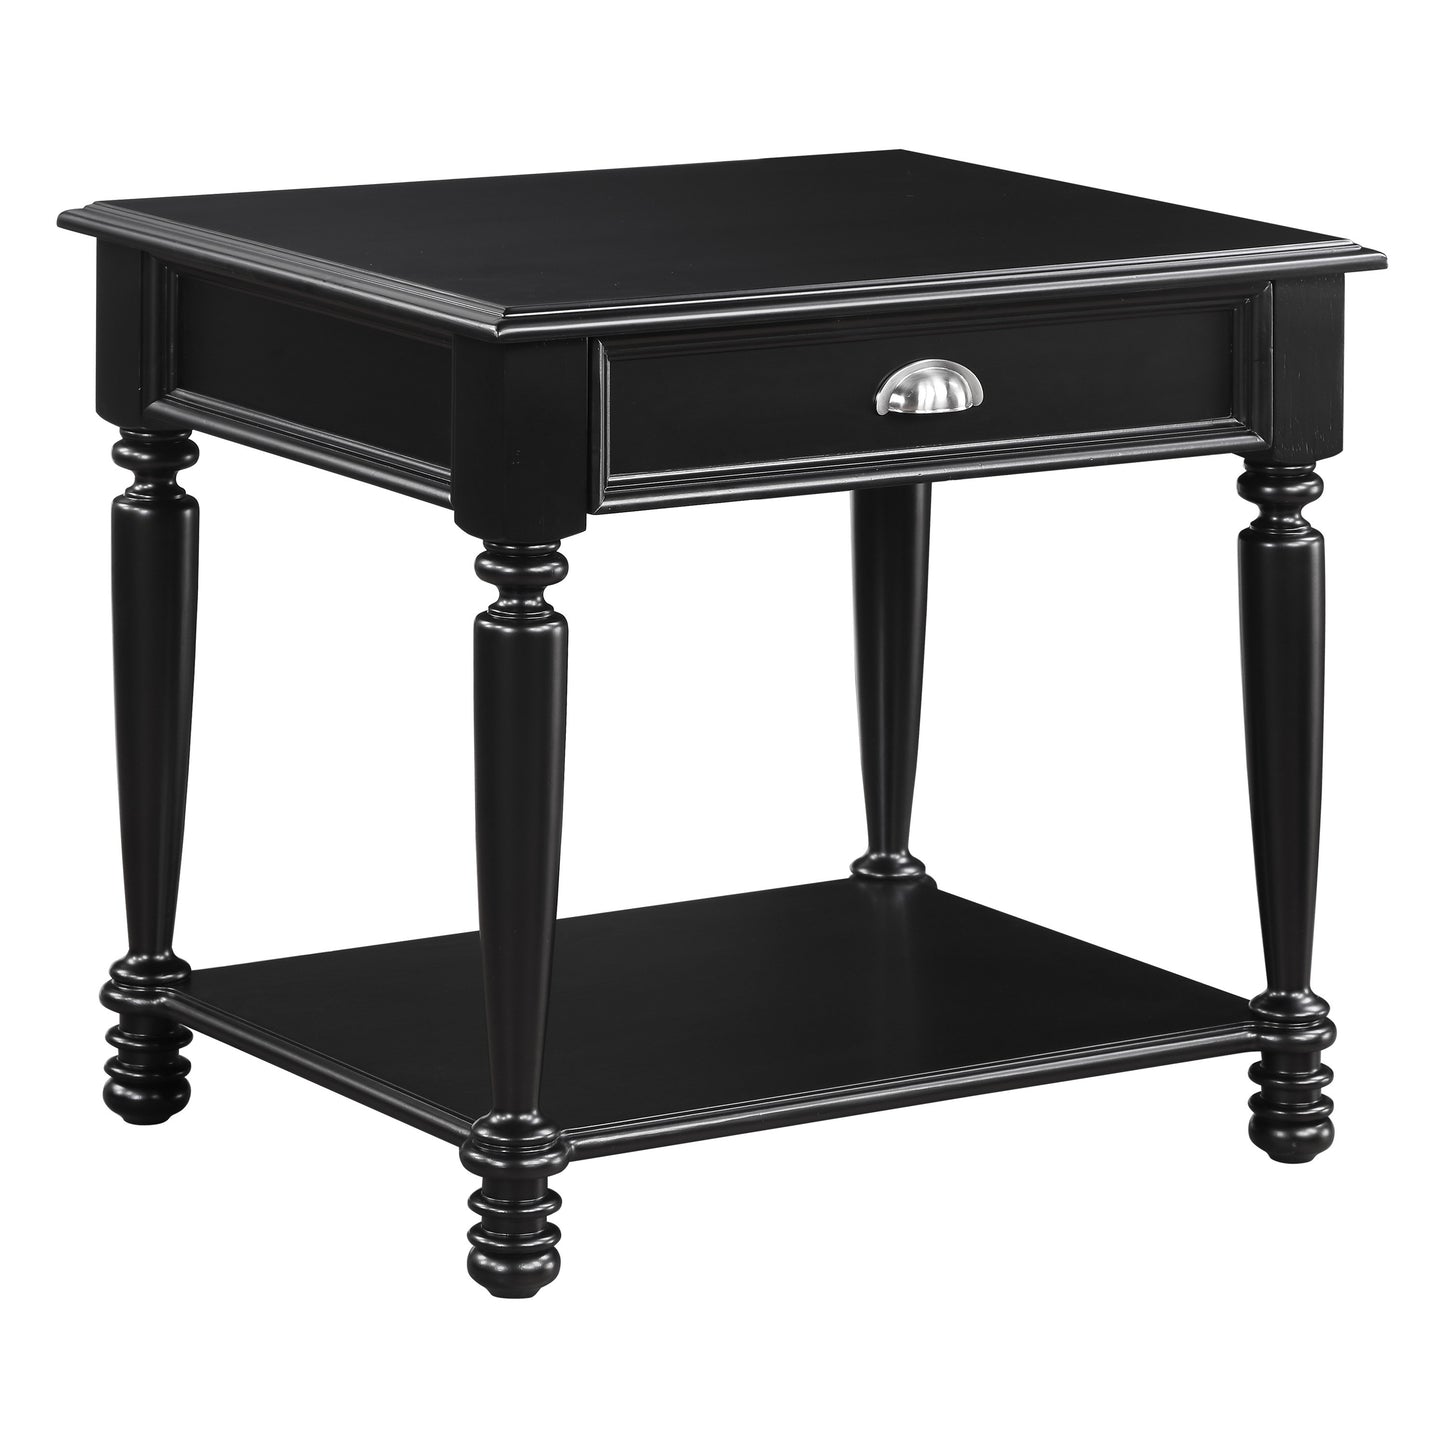 Sanders Lift Top Coffee Table BLACK ONLY